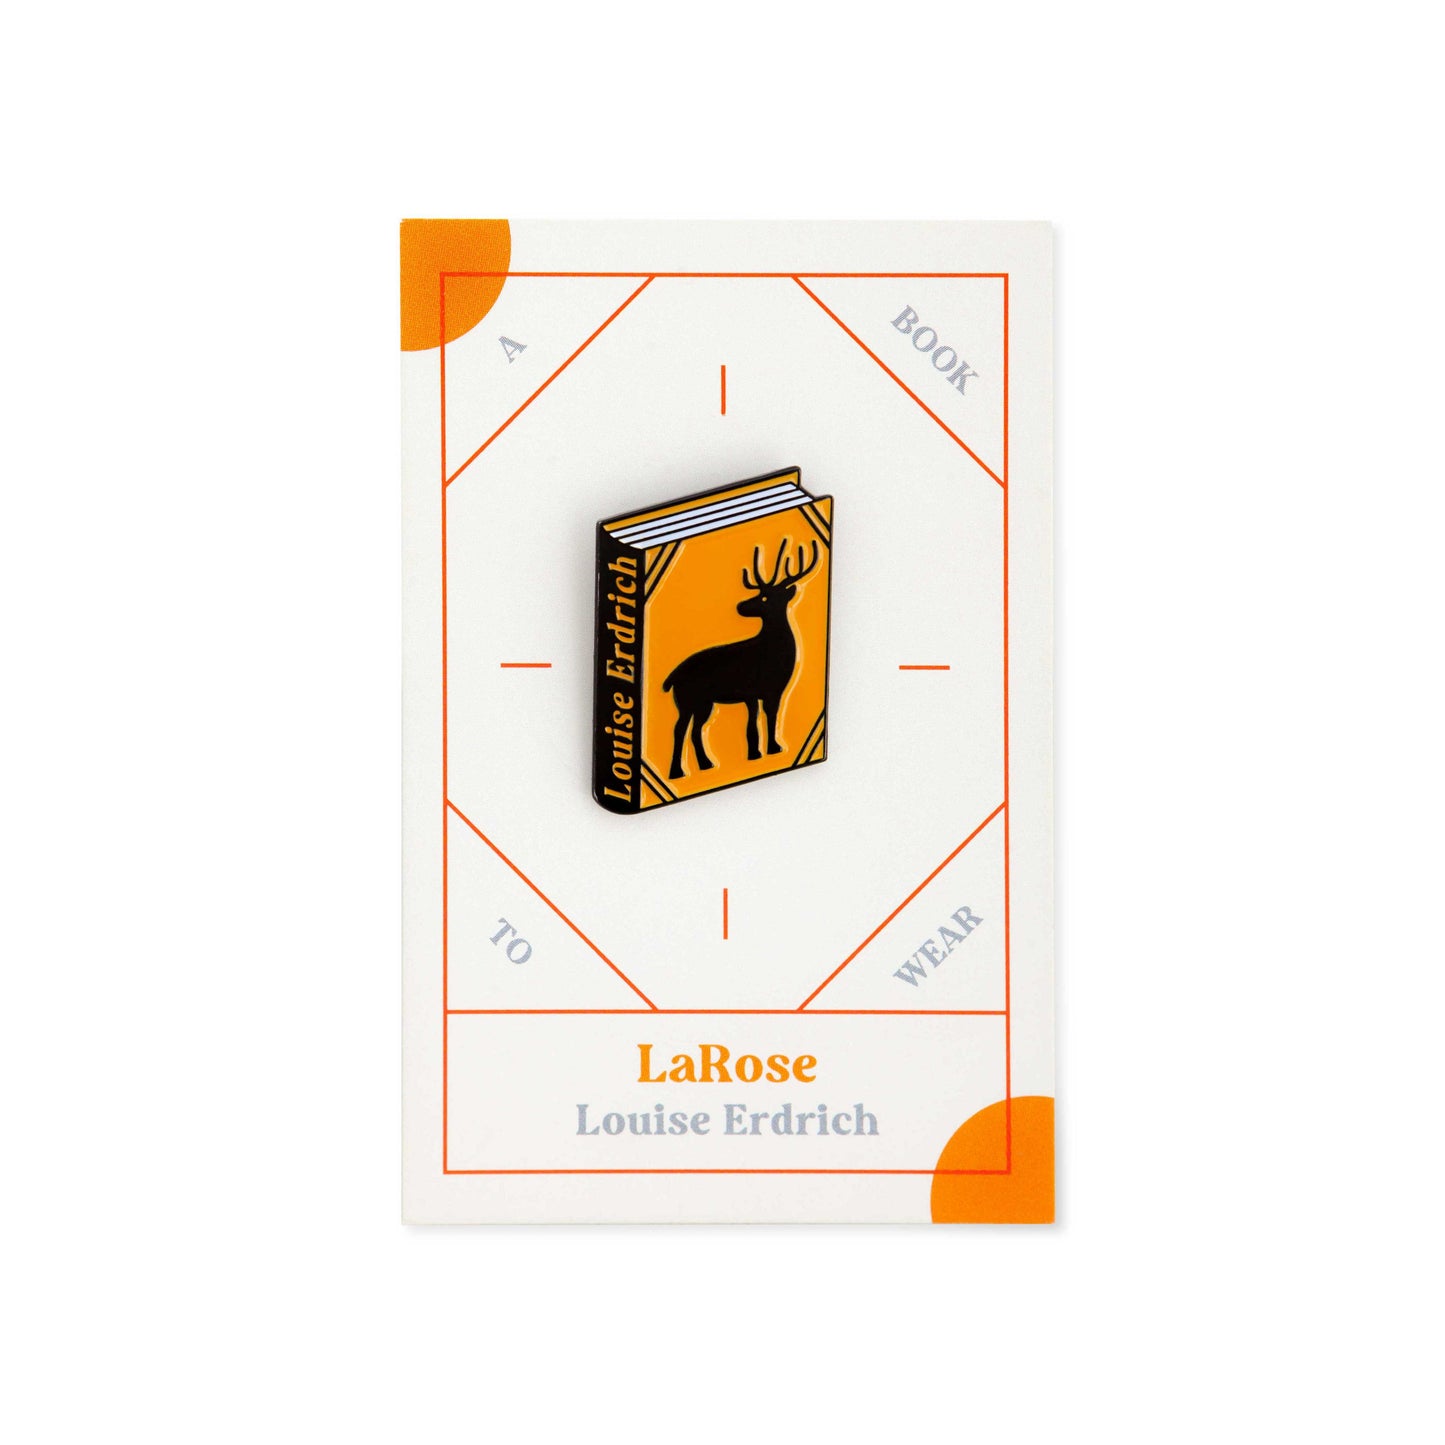 LaRose by Louise Erdrich Enamel Pin by Judy Kaufmann with packaging